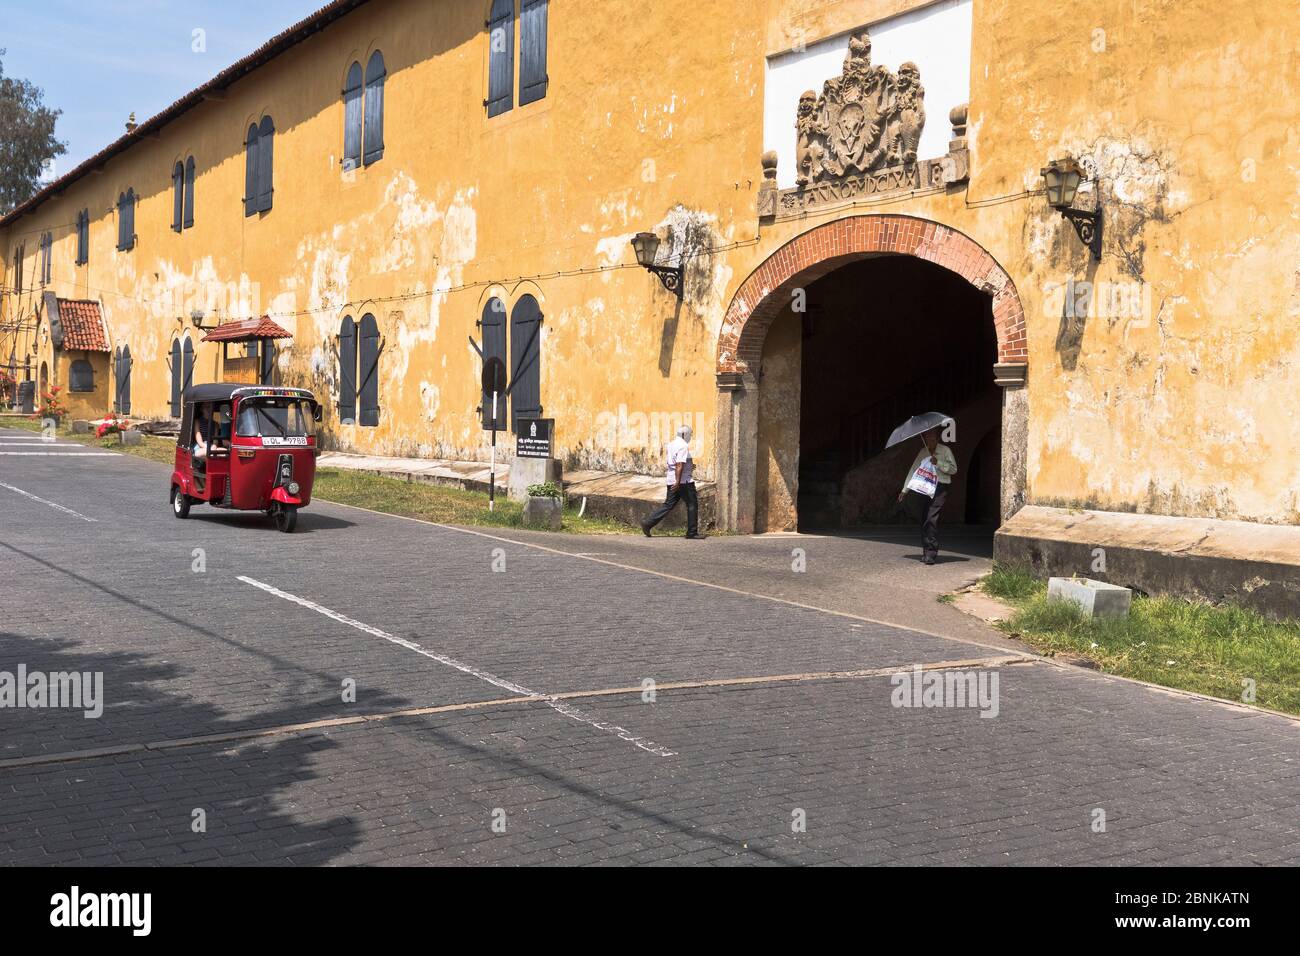 dh Dutch Forts Old Gate GALLE FORT SRI LANKA Red Tuk Tuk people historical entrance Stock Photo